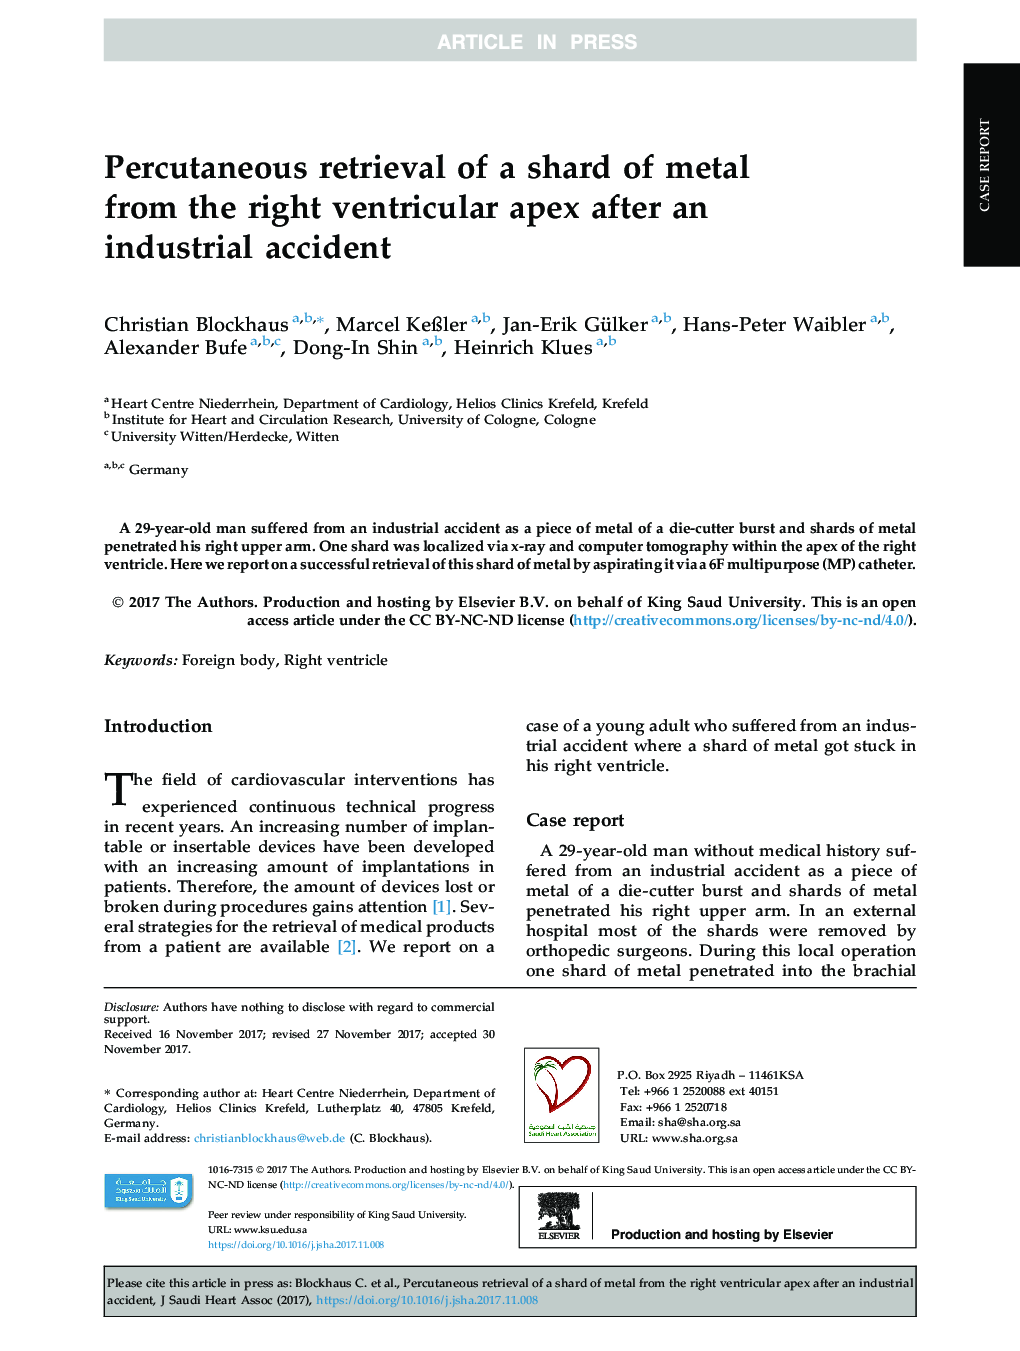 Percutaneous retrieval of a shard of metal from the right ventricular apex after an industrial accident